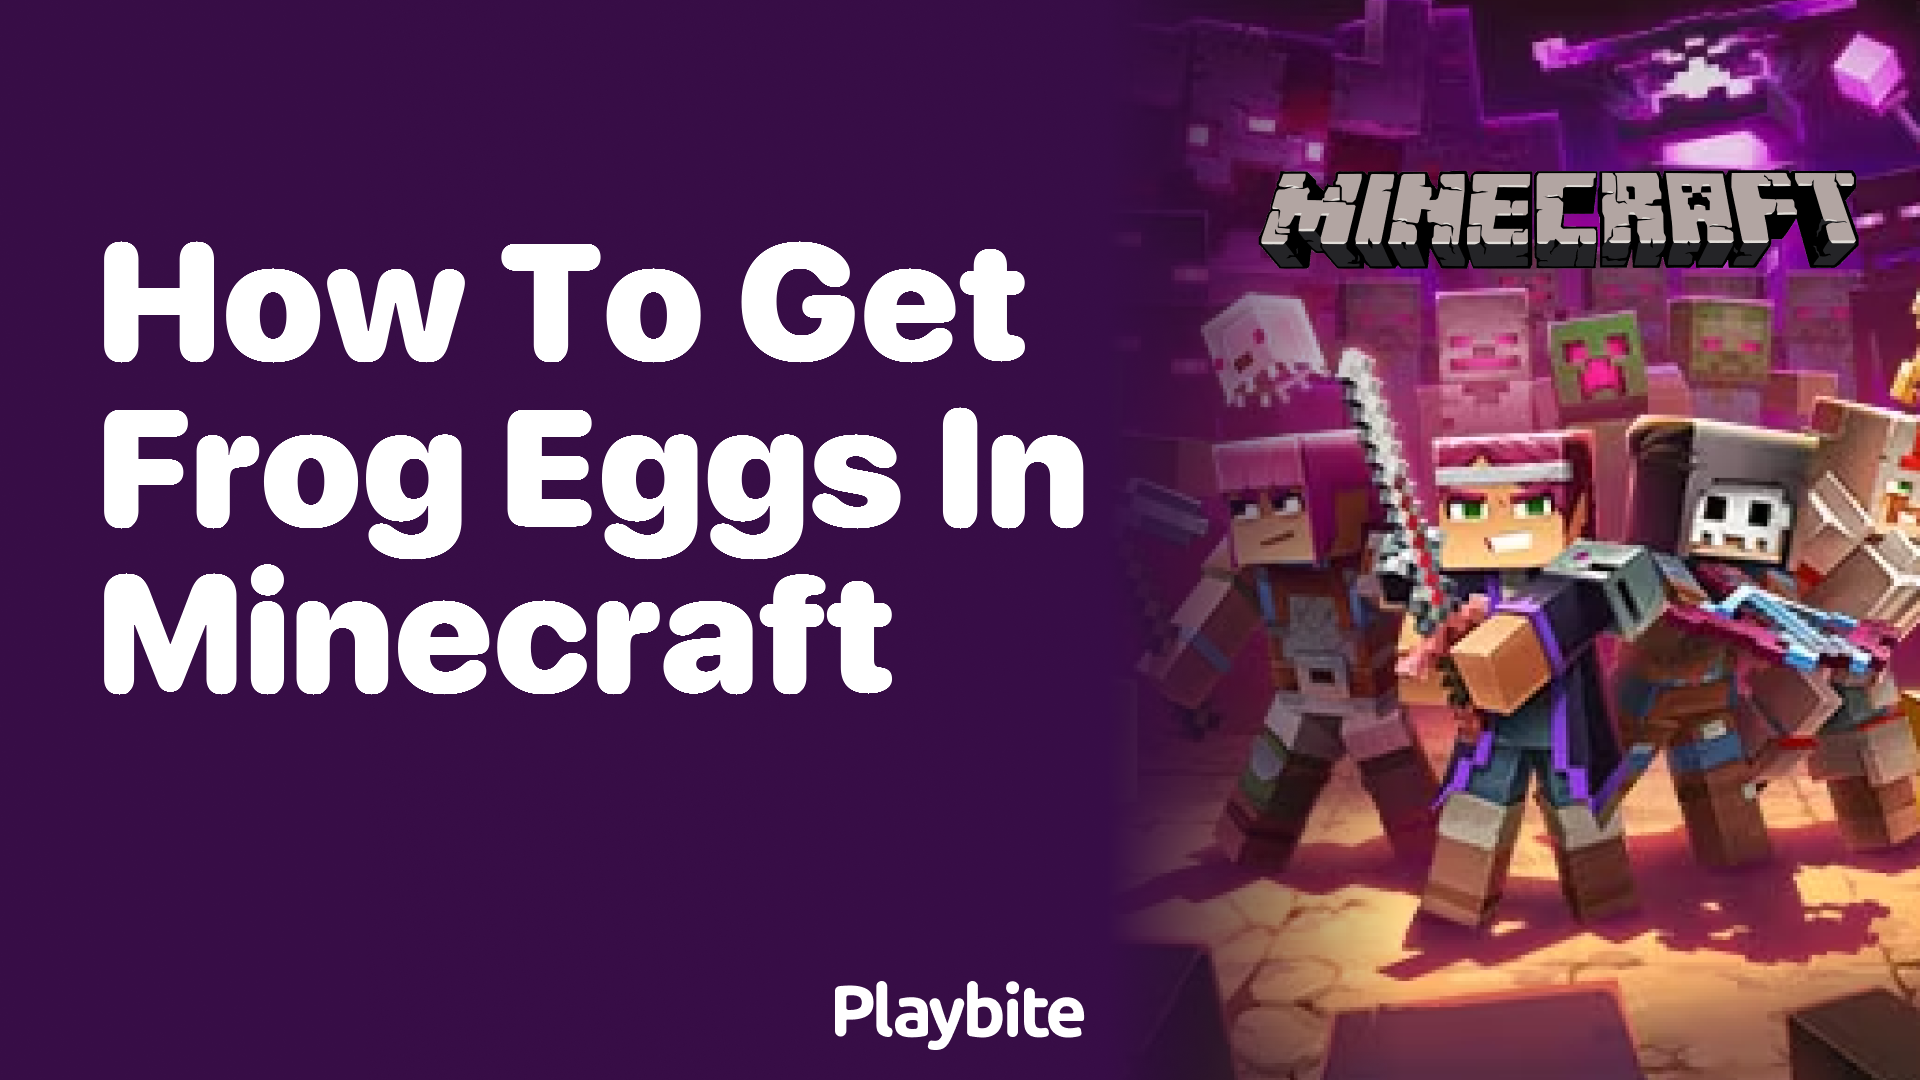 How to Get Frog Eggs in Minecraft: A Simple Guide - Playbite